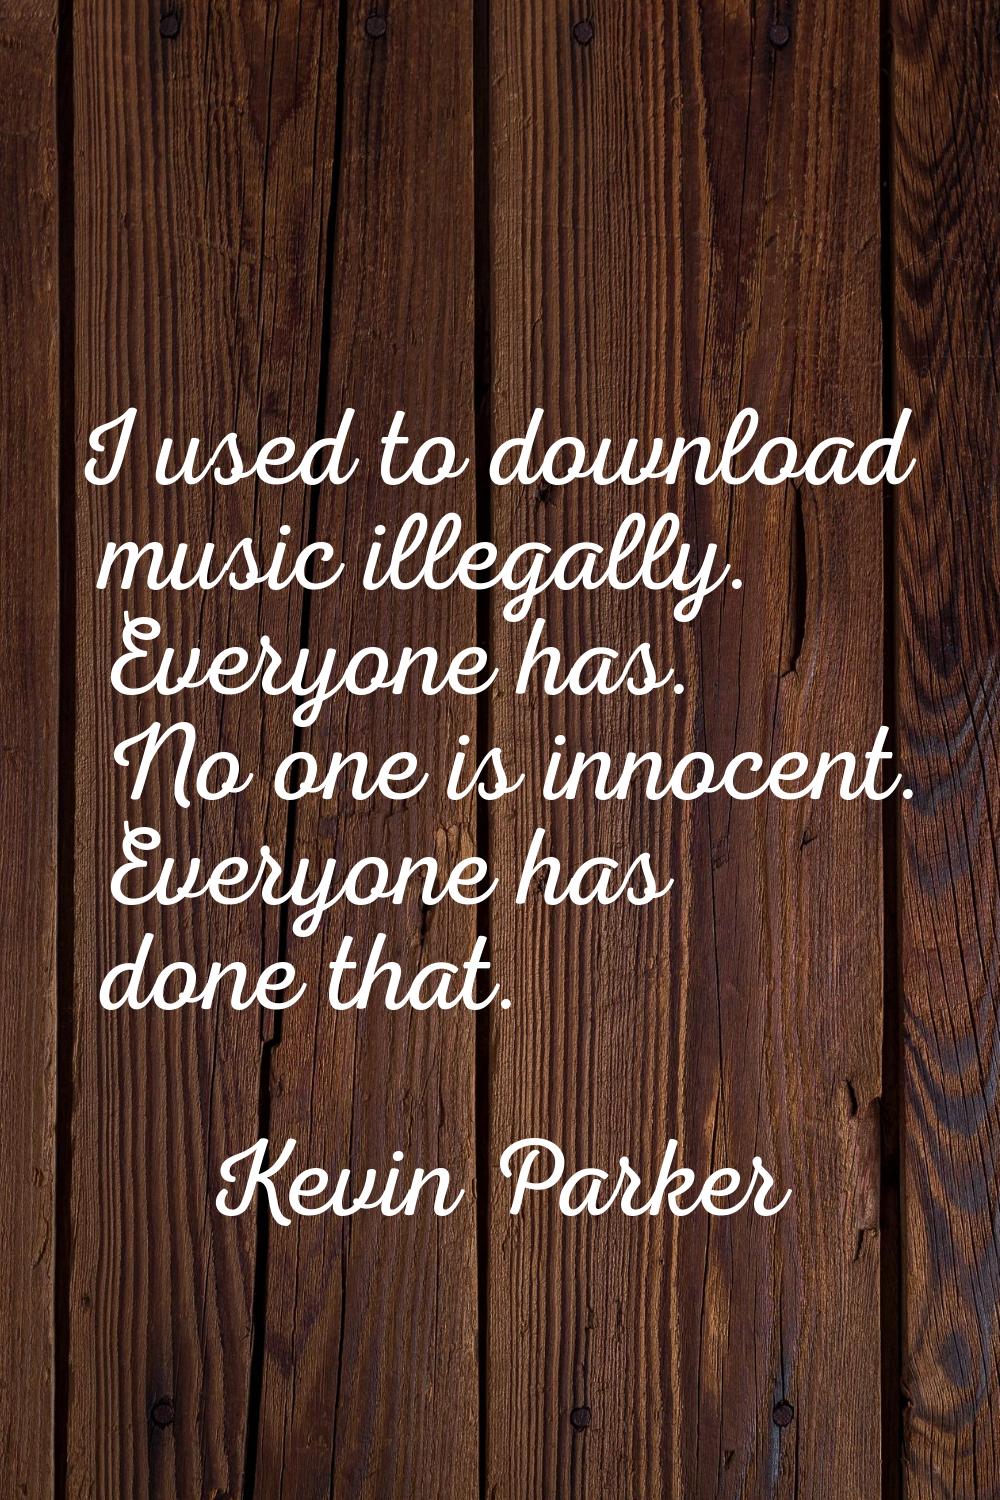 I used to download music illegally. Everyone has. No one is innocent. Everyone has done that.